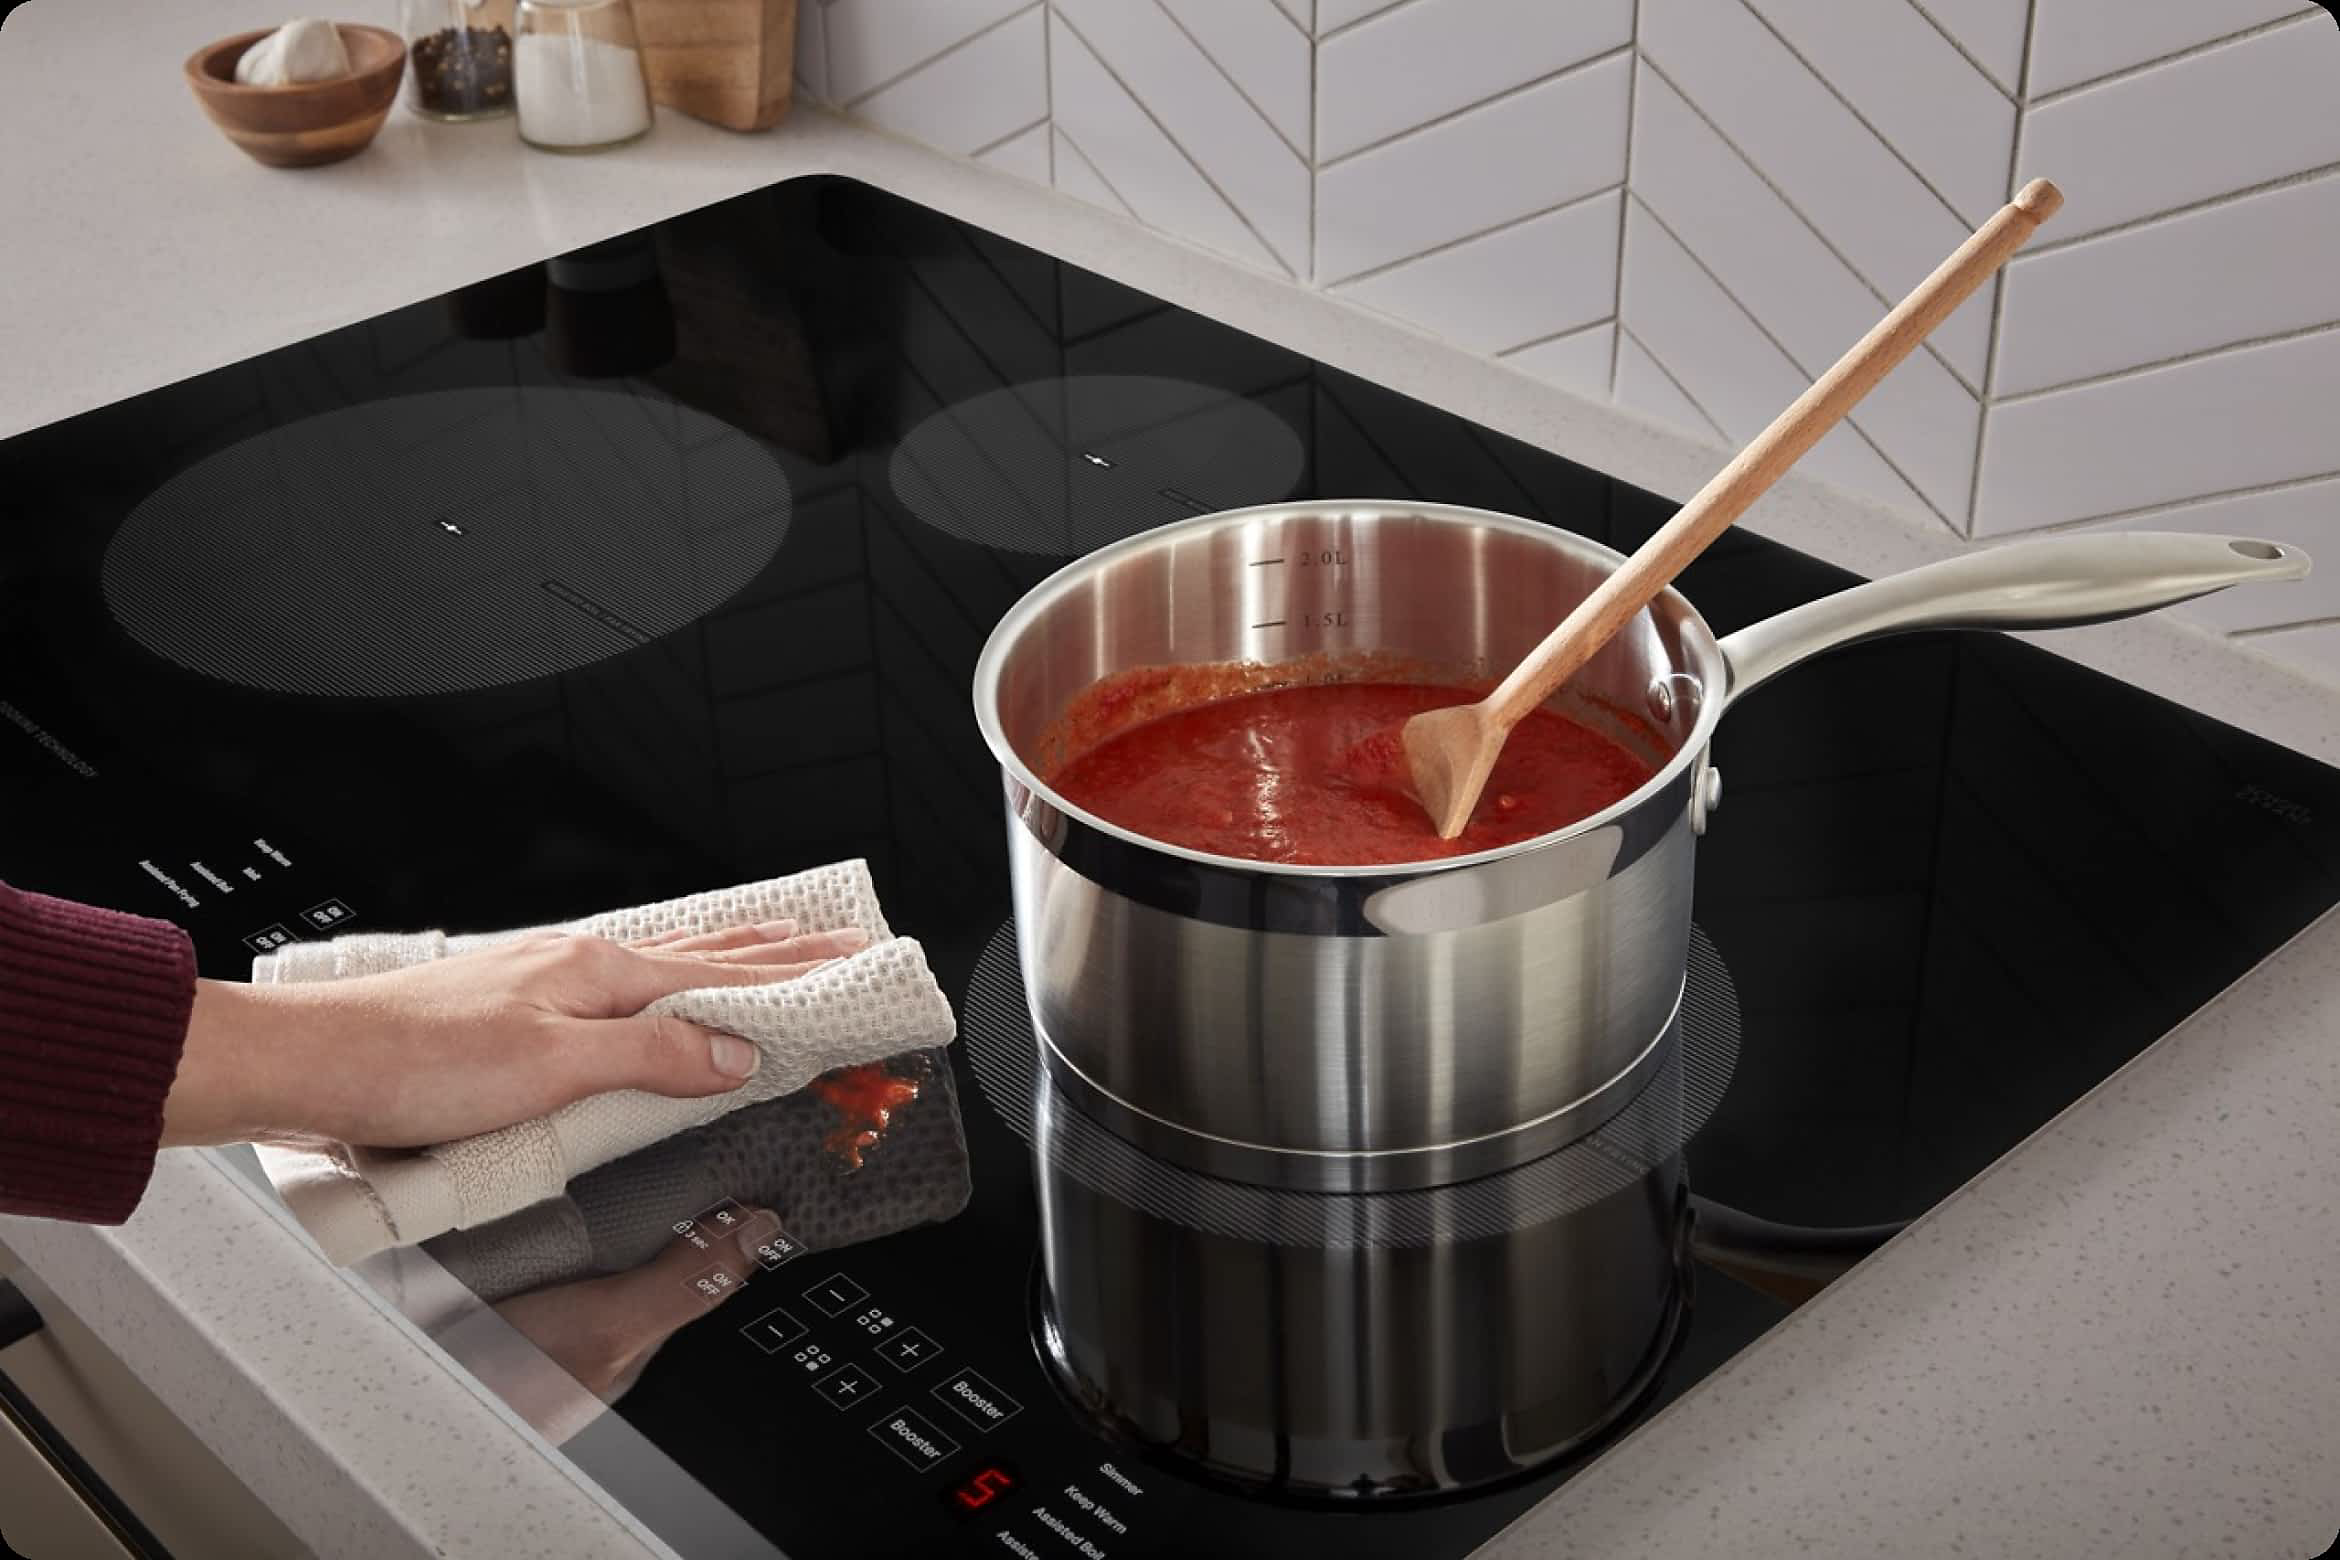 Hands wipe down a Whirlpool® Cooktop as sauce simmers